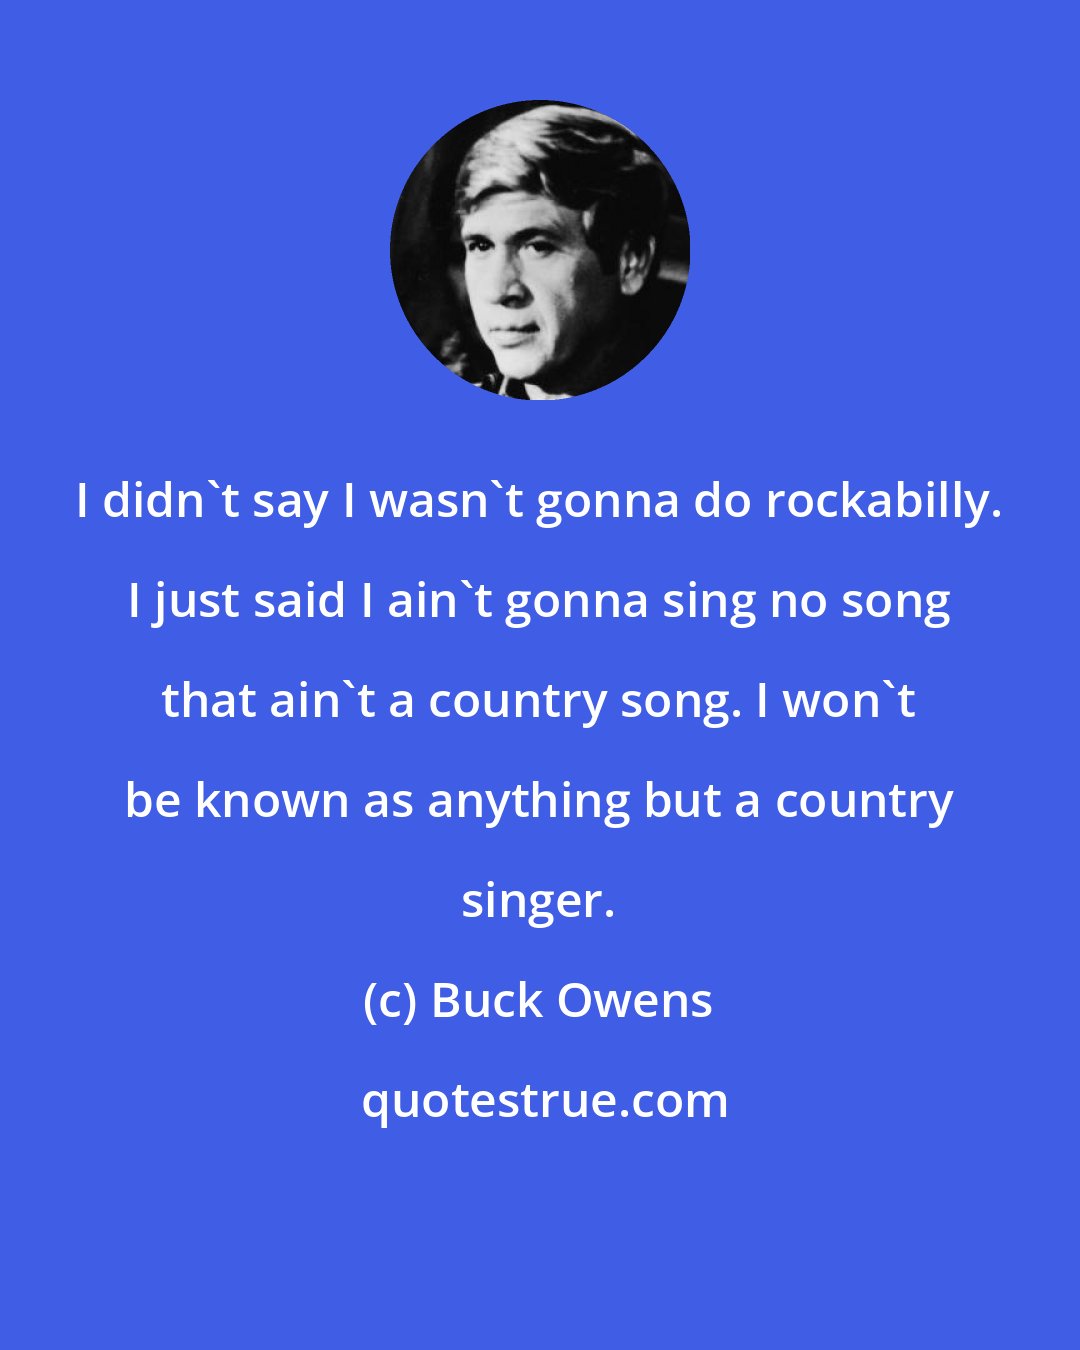 Buck Owens: I didn't say I wasn't gonna do rockabilly. I just said I ain't gonna sing no song that ain't a country song. I won't be known as anything but a country singer.